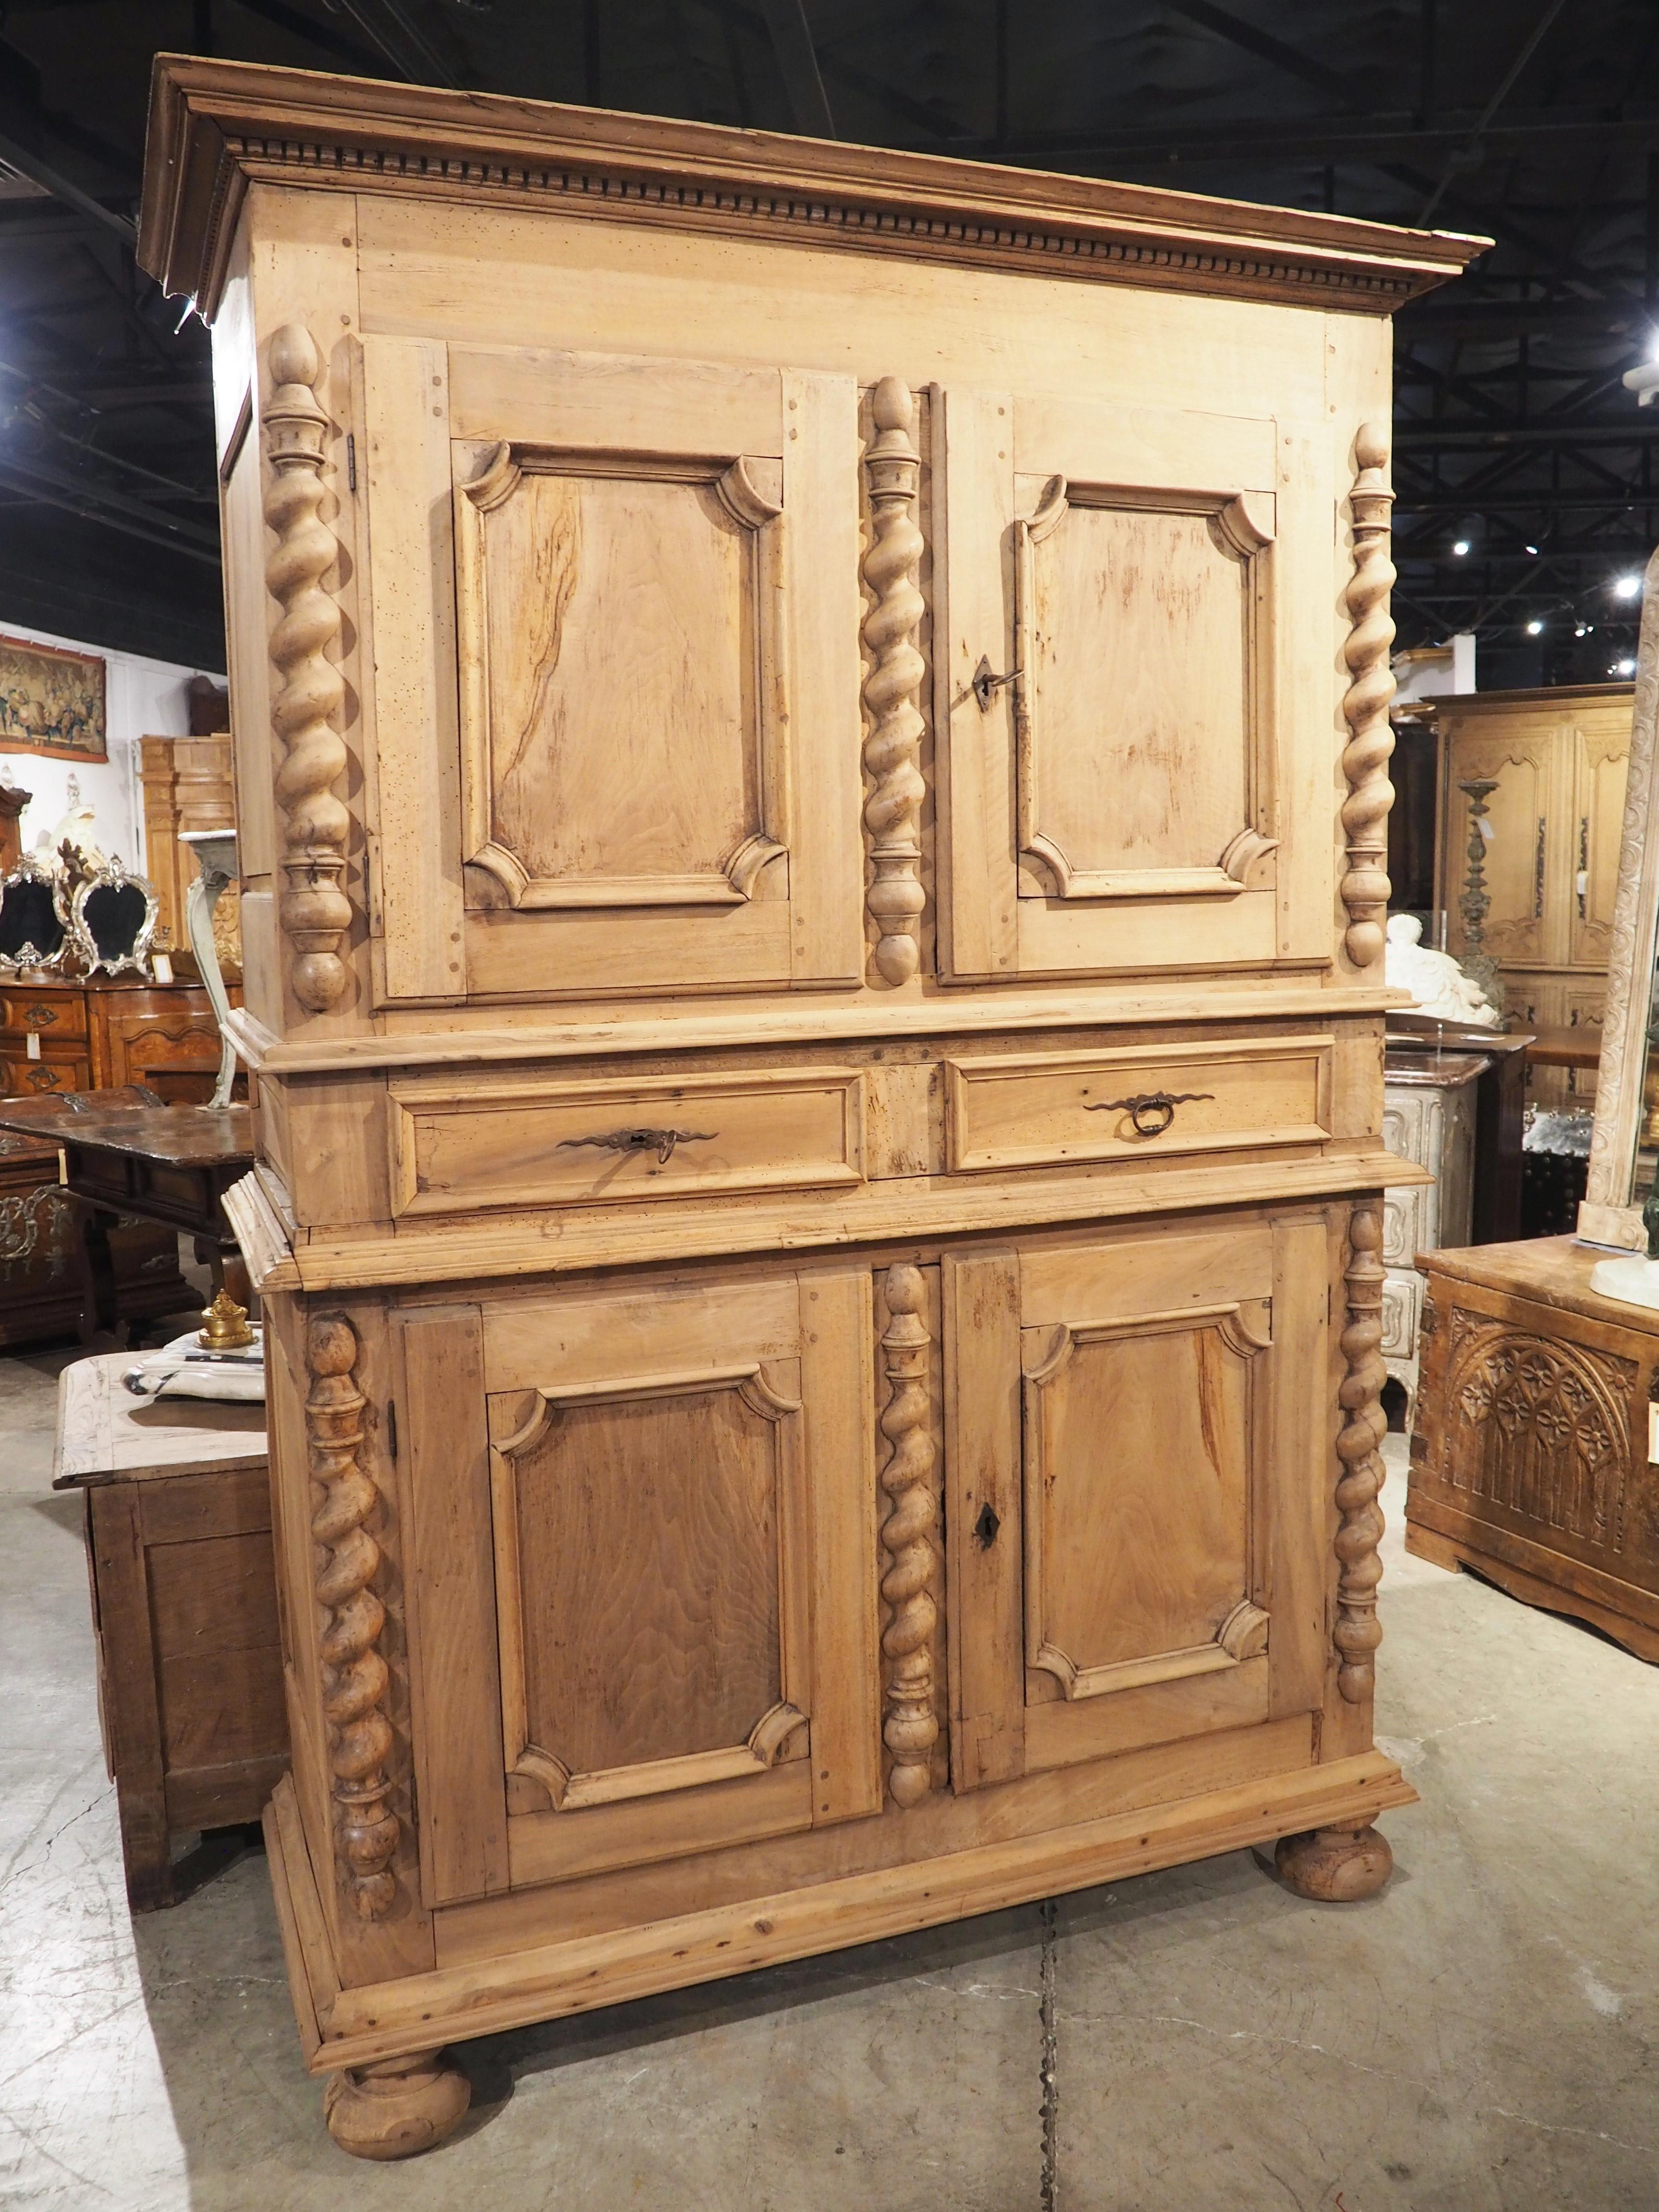 When antique furniture is bleached, such as this 18th century walnut four door buffet from Lyon, France, it allows the wood grain and carved elements to become focal points. Notice the thick moldings above and below the doors, as well as the turned